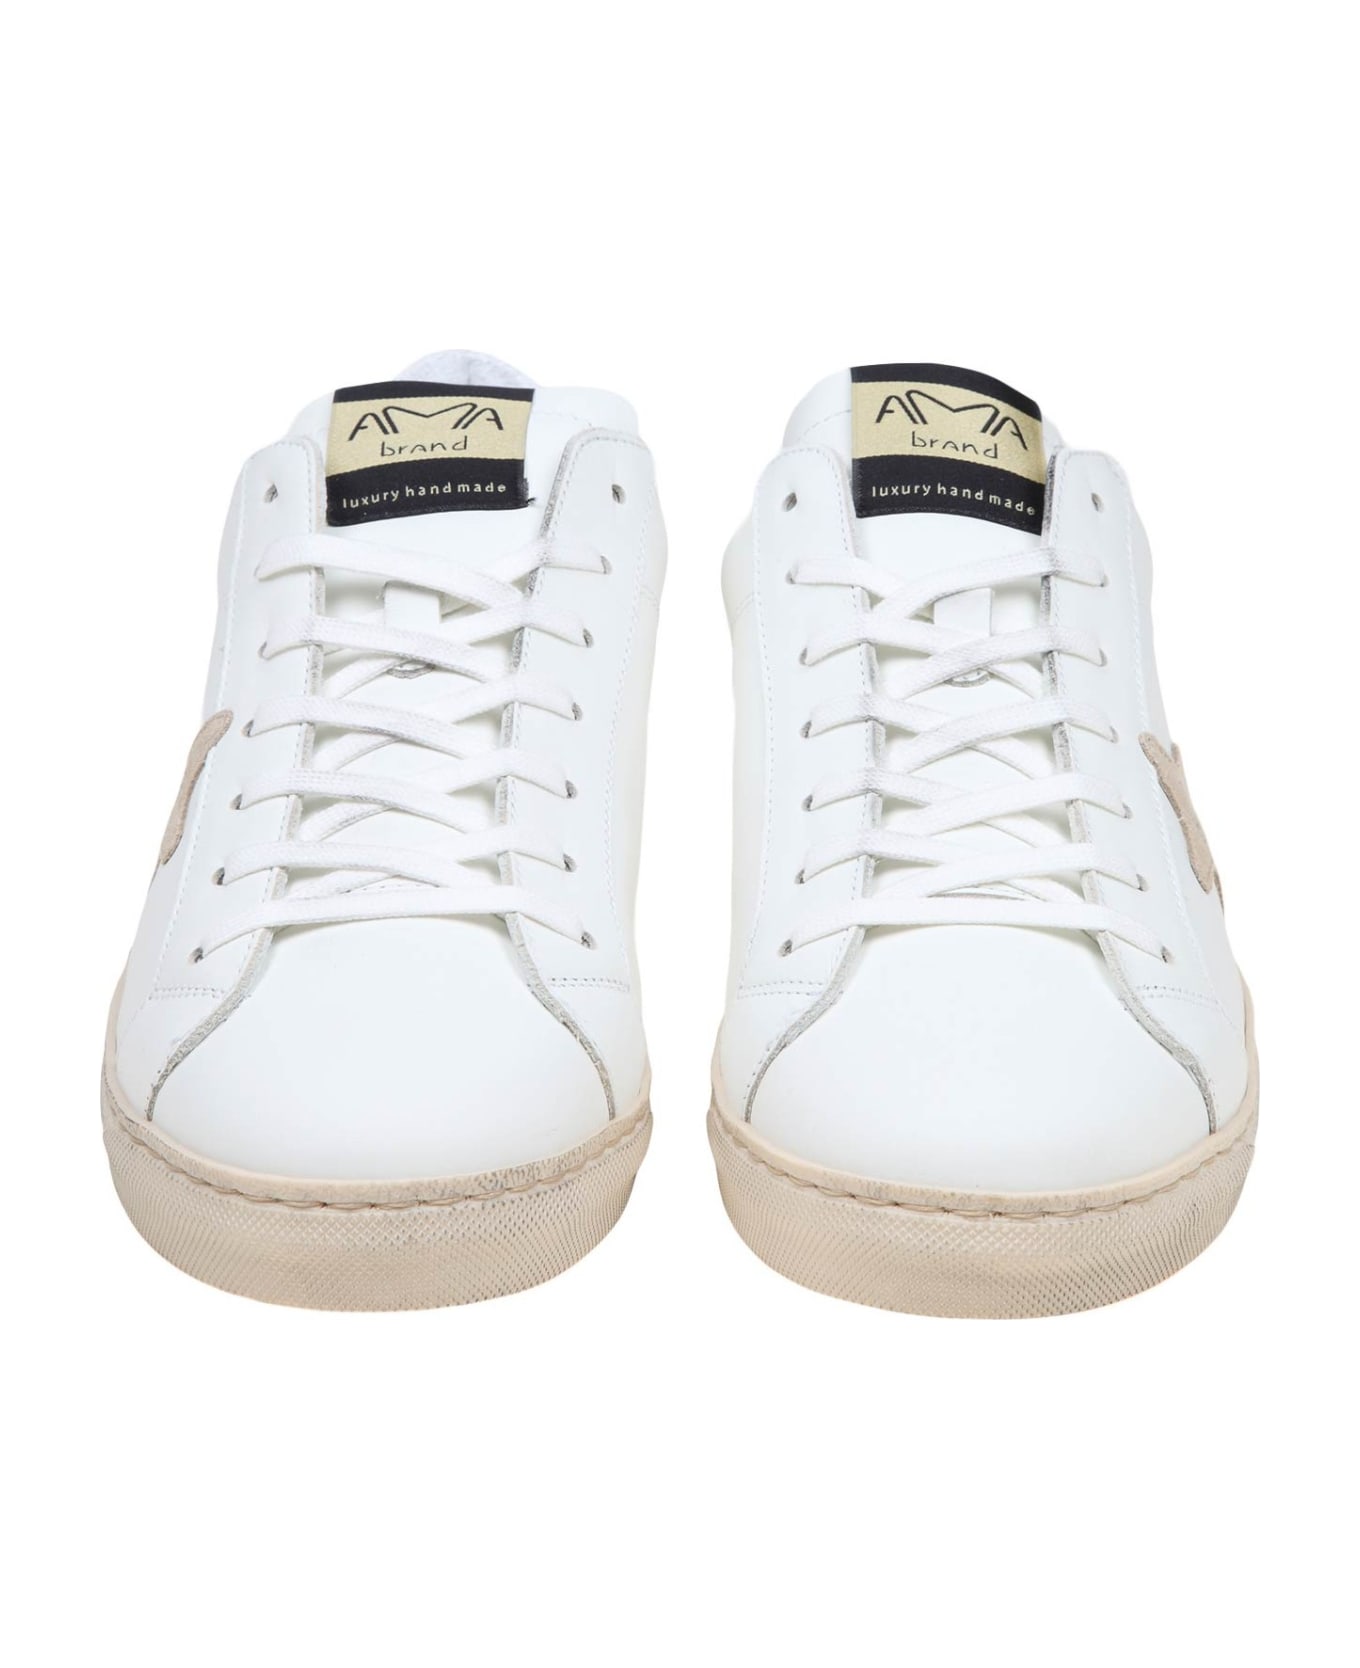 AMA-BRAND White And Taupe Leather Sneakers - WHITE/TAUPE